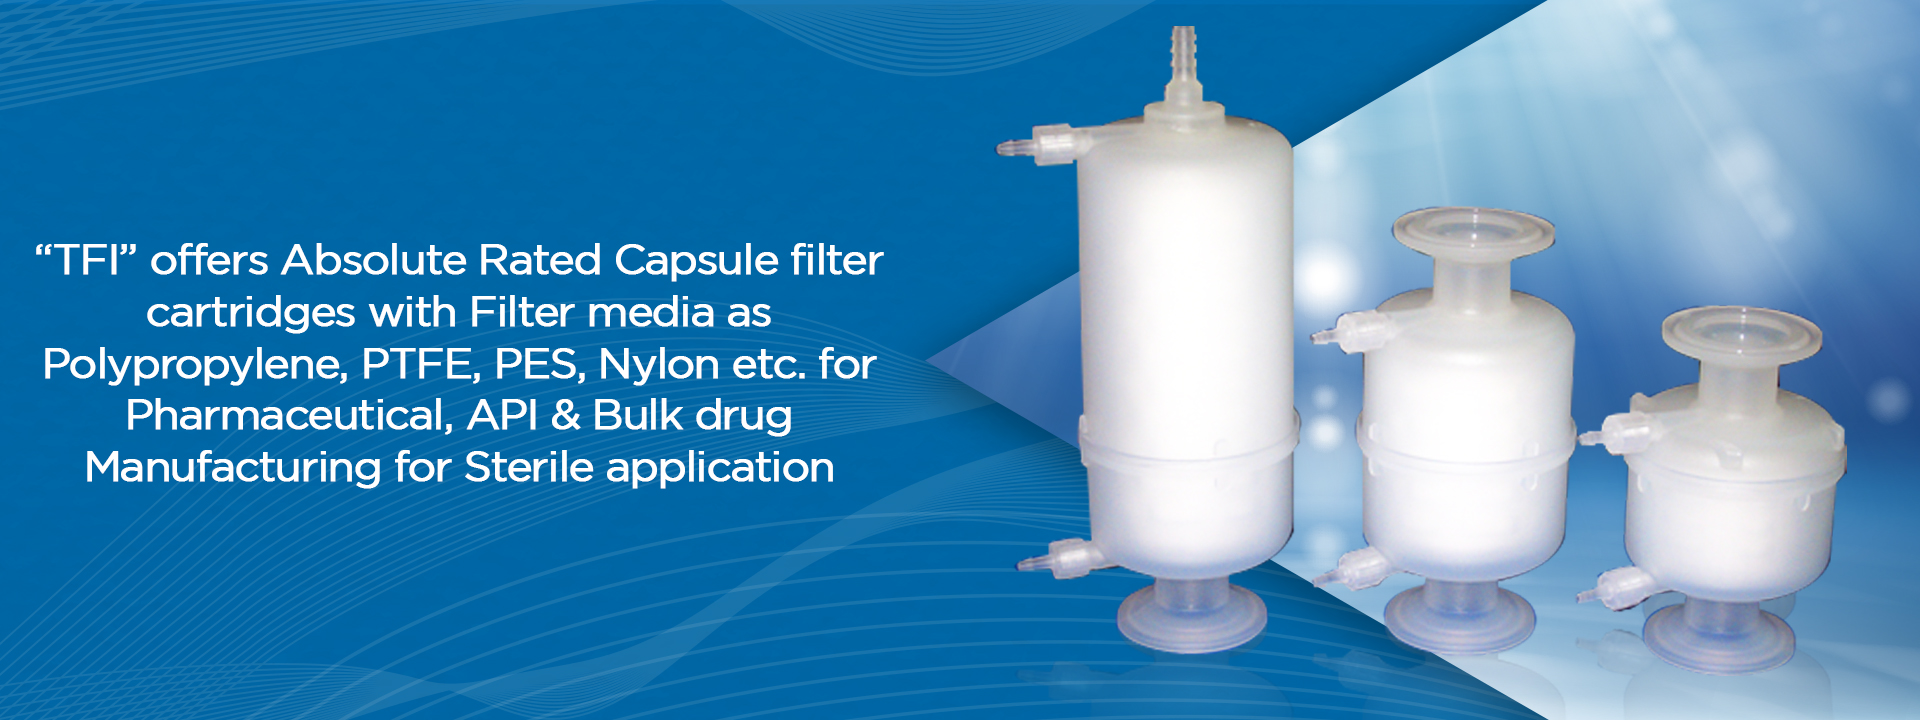 Cartridge Filter Systems, Bag Filter Systems, Dust Collector Filters, Disposable Filter Cartridges | TFI Filtration UK Ltd are manufacturers of quality filtration systems and consumables for commercial and industrial purposes | Customised Applications, Low Operating Costs